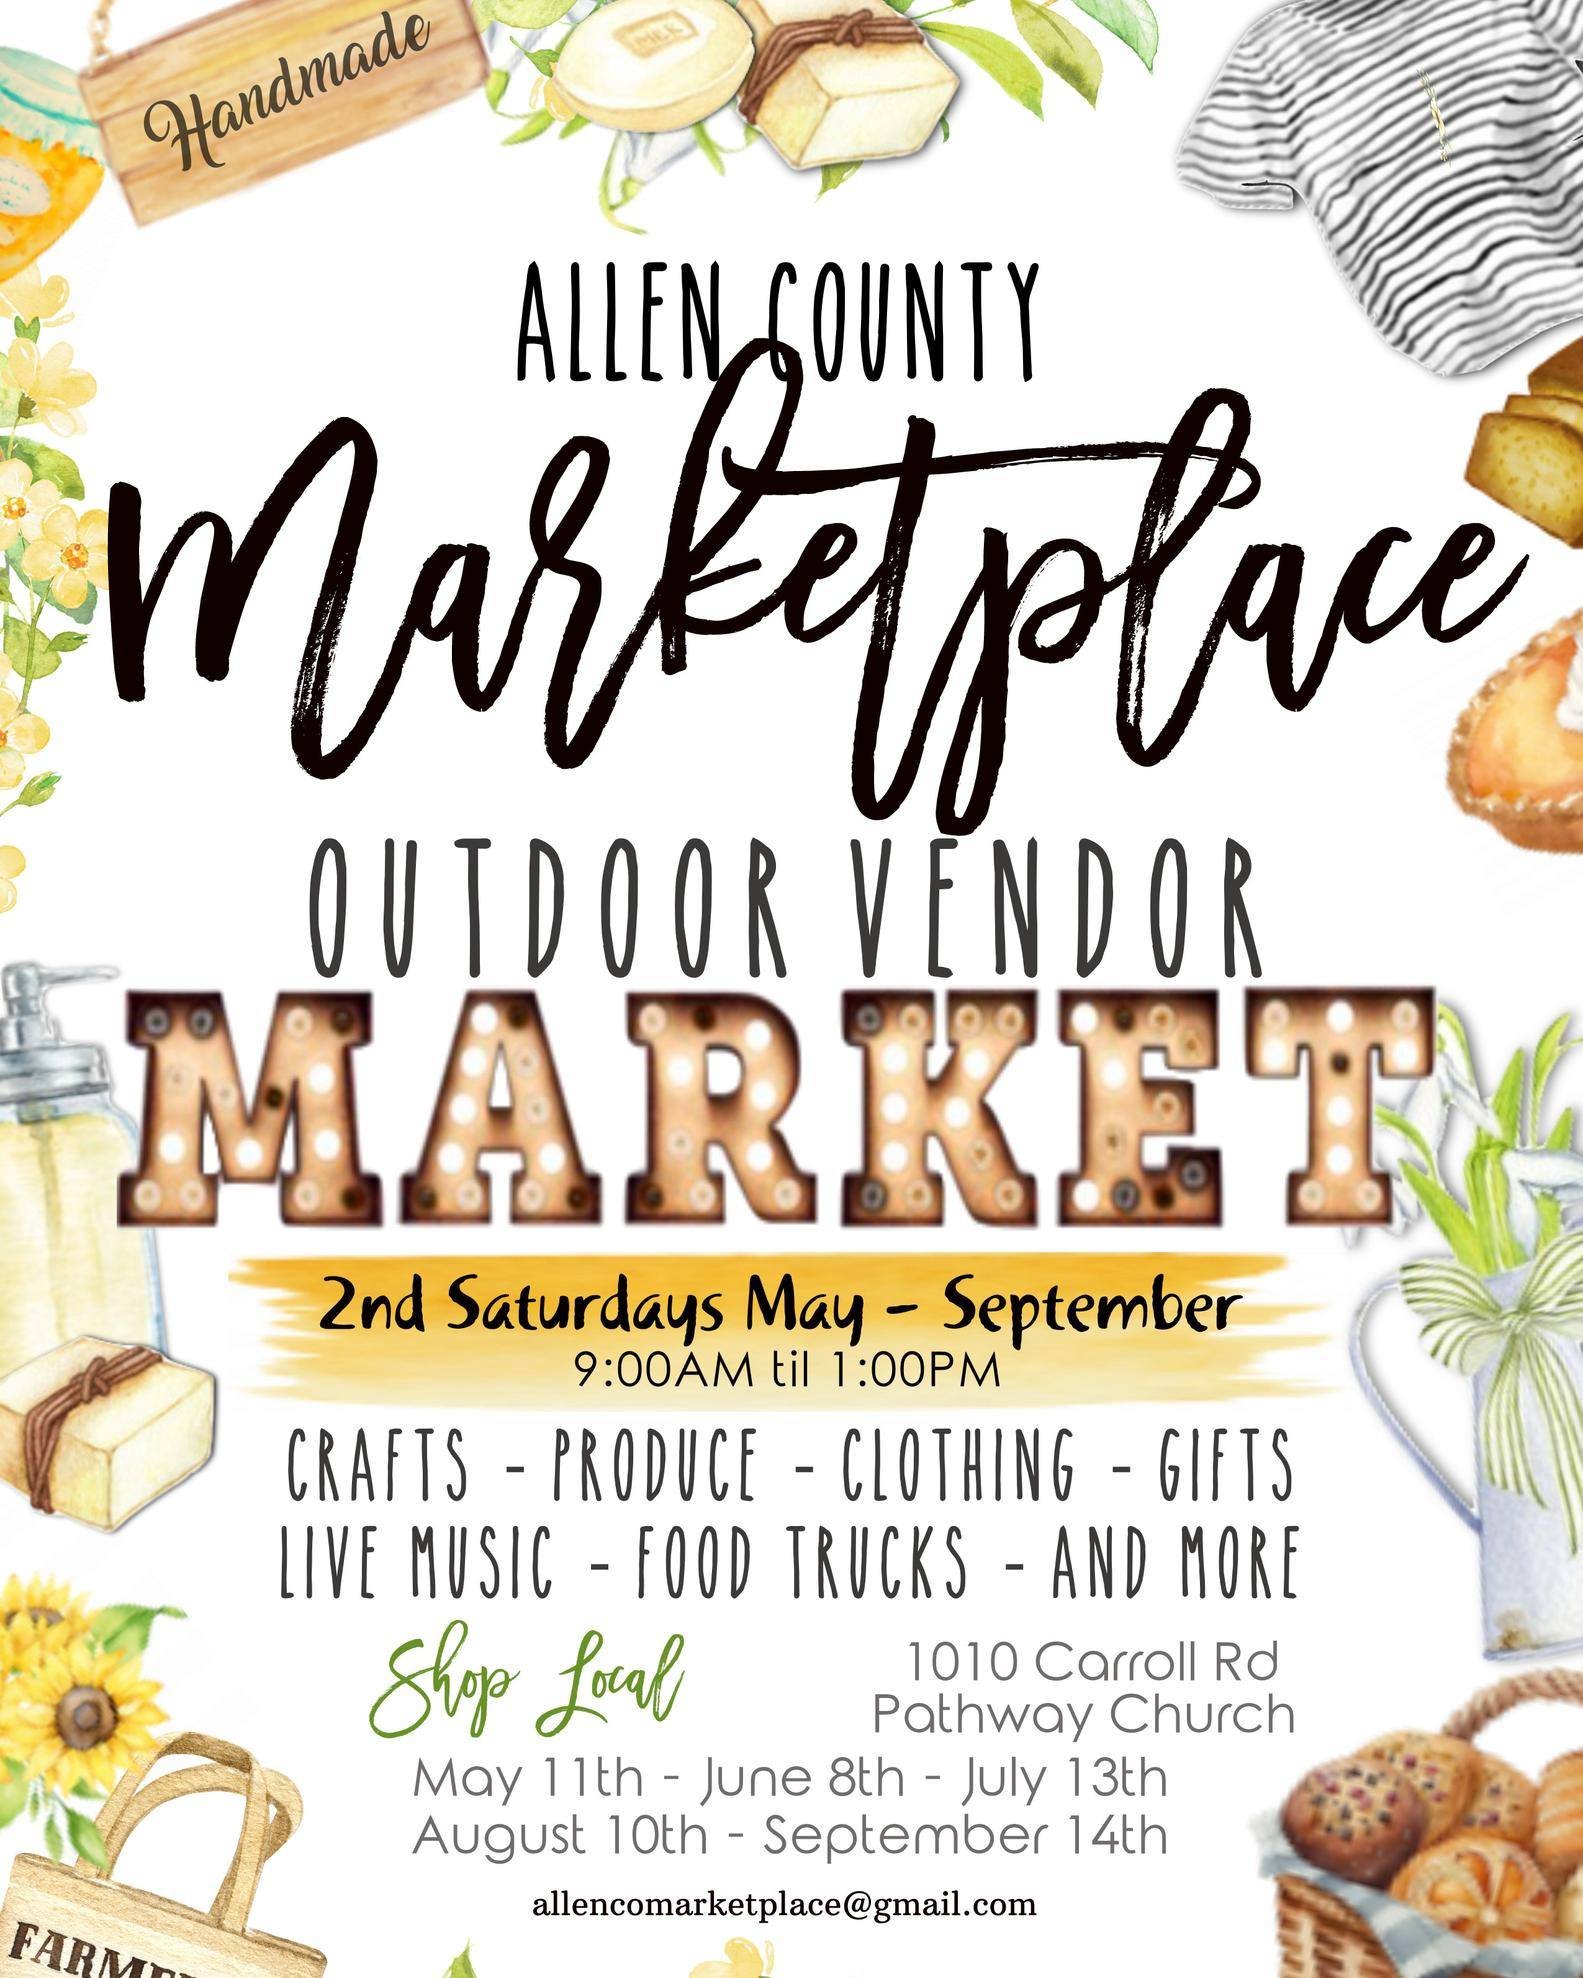 Next Up: Find me out at Allen County Marketplace this Saturday, May 11th! I'll have some of my new items with me ^_^
#market #sellingthings #smallbusiness #shoplocal #lasercutaccessories #fortwayne #shopfortwayne #indiana